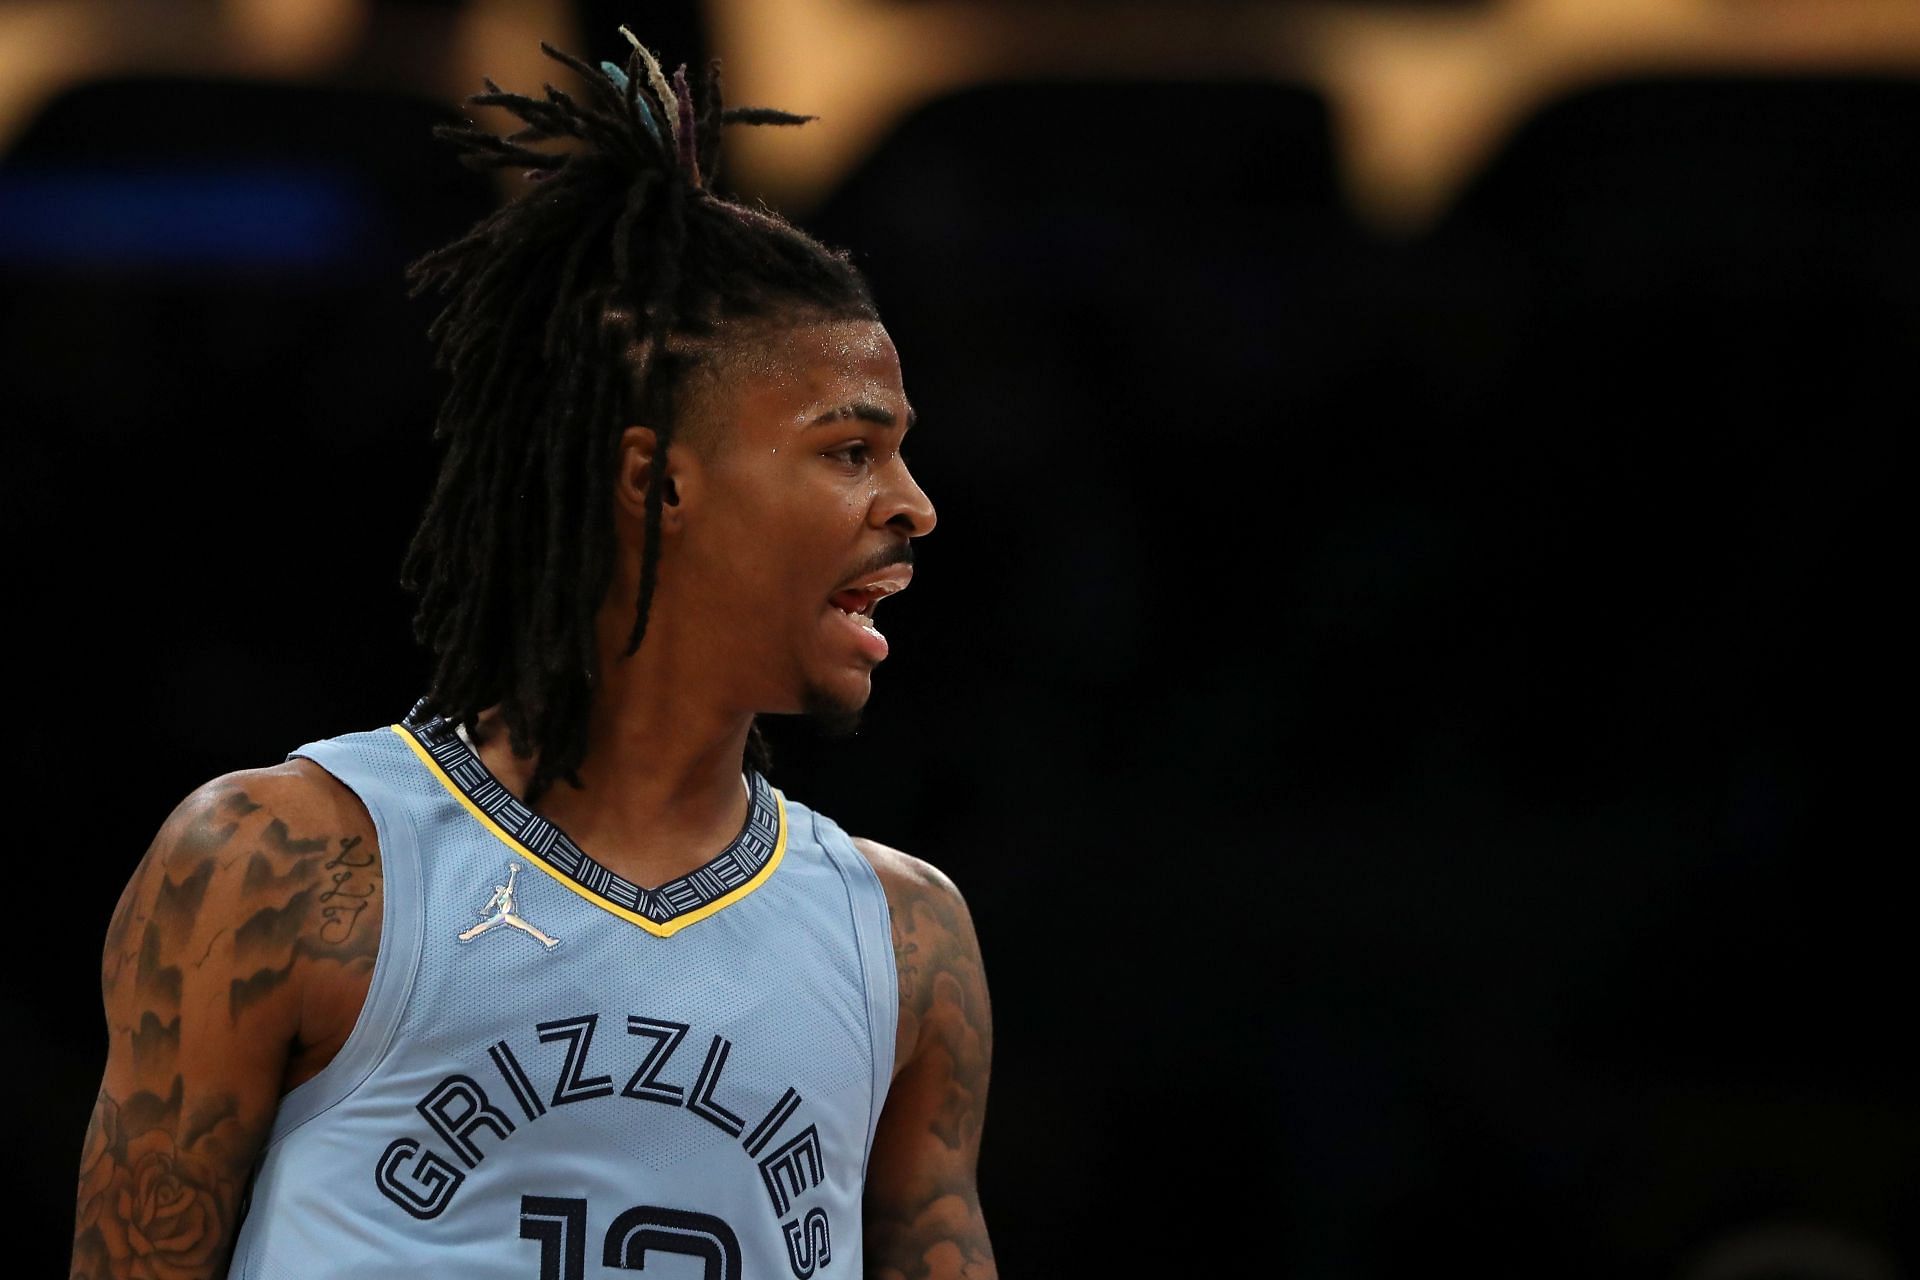 Ja Morant #12 of the Memphis Grizzlies reacts to a play during the first quarter against the Los Angeles Lakers at Crypto.com Arena on January 09, 2022 in Los Angeles, California.